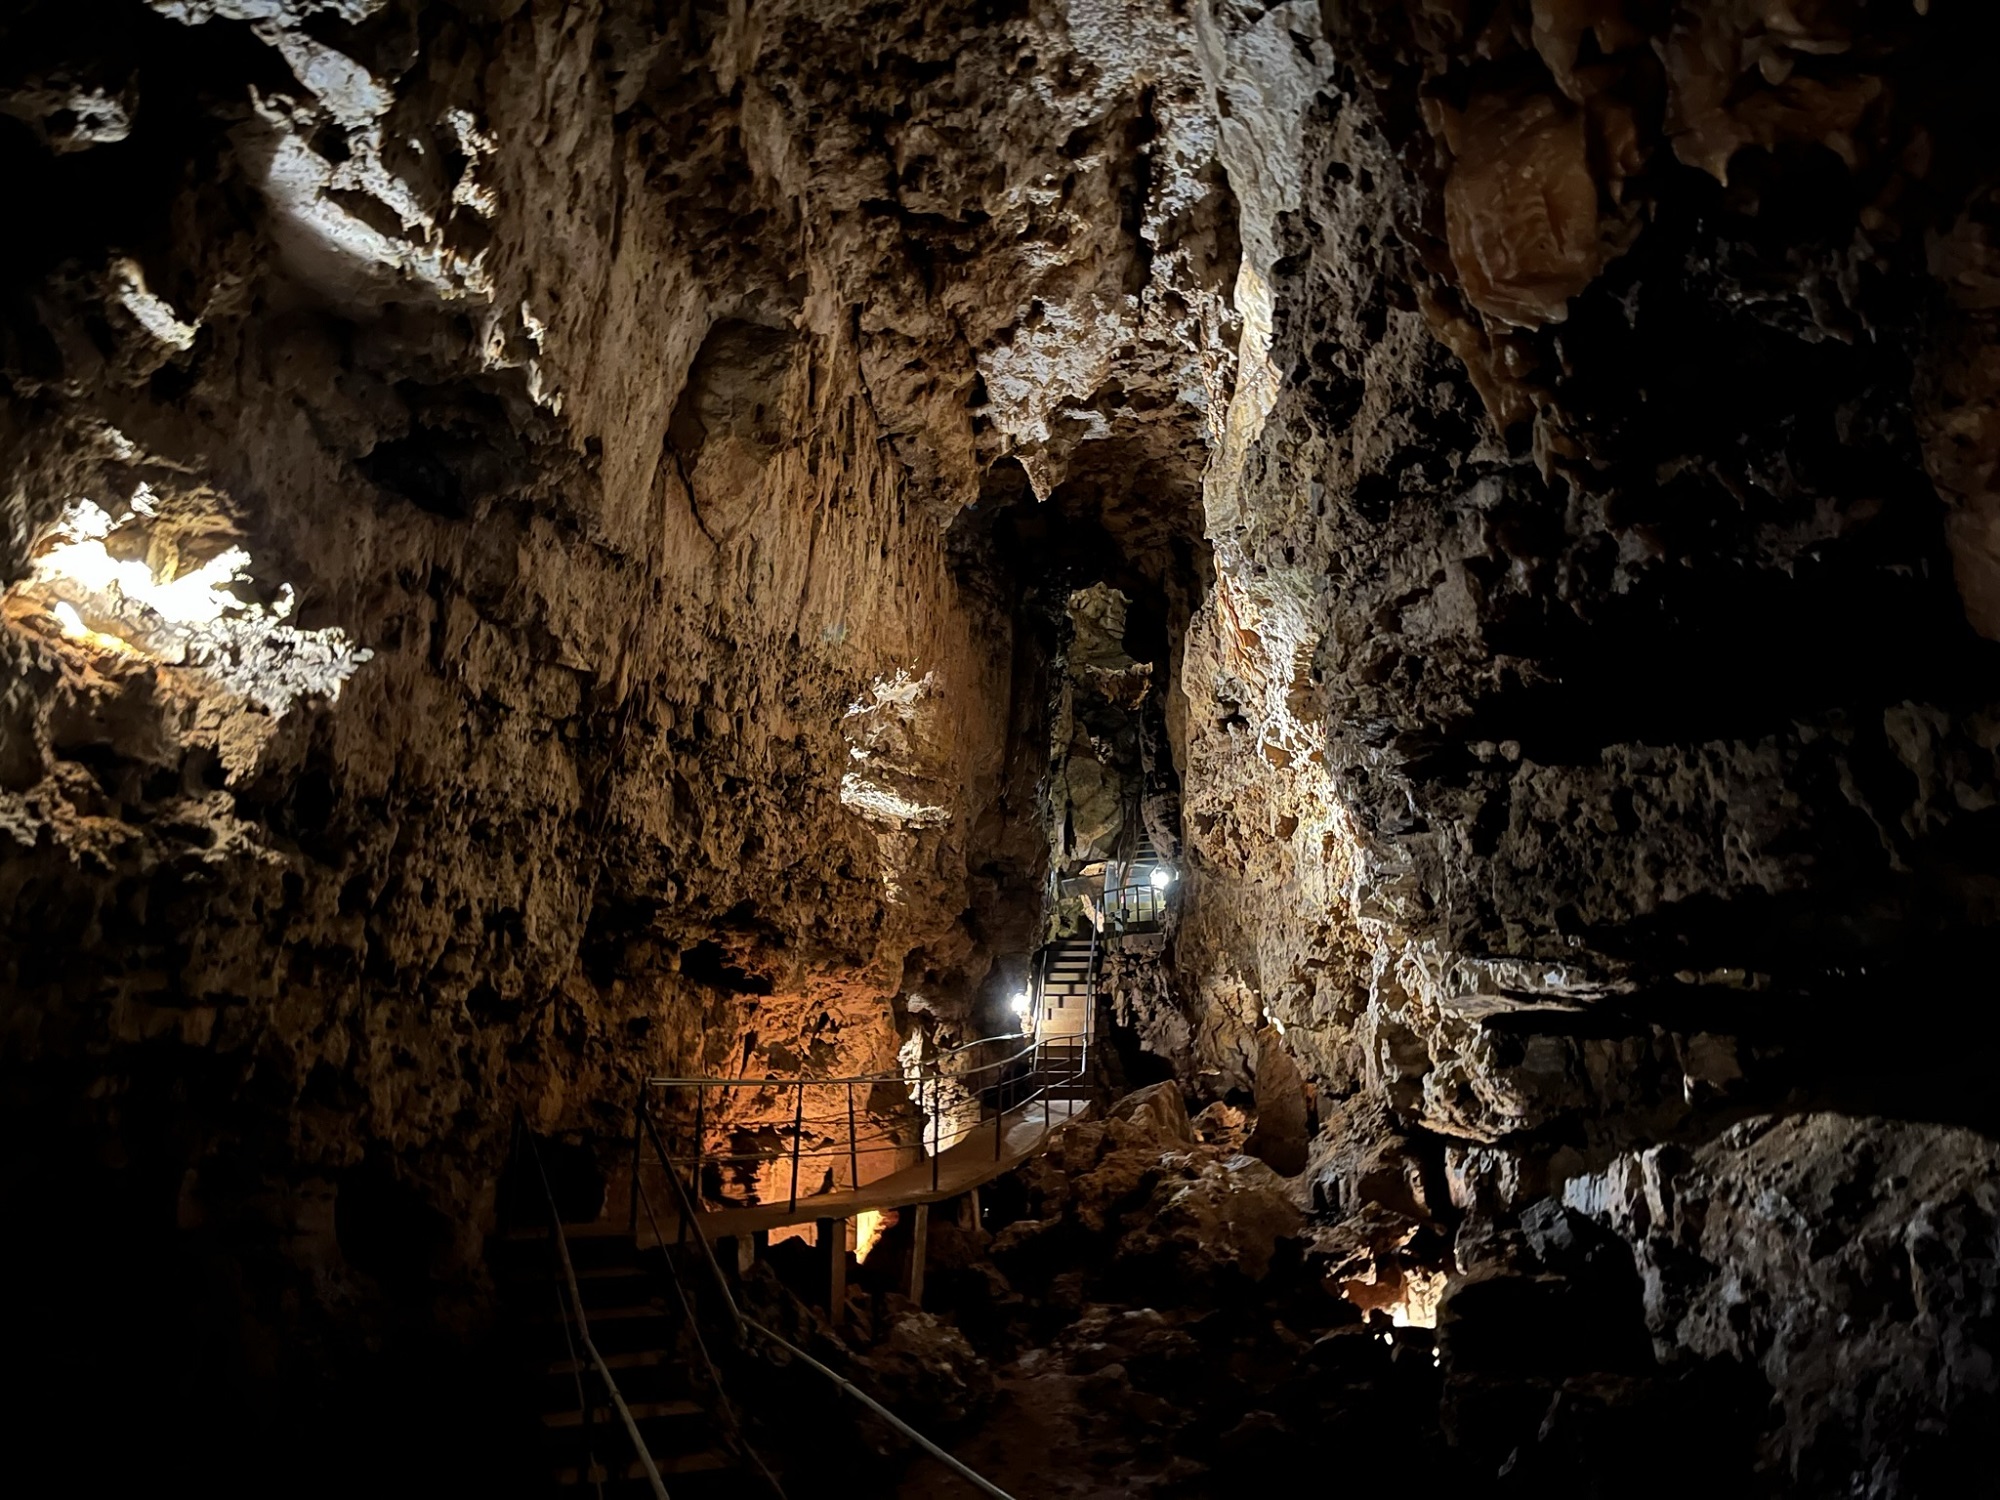 The Cathedral Room of Kickapoo Caverns attracted tourists for decades, with couples even having wedding ceremonies in the cave. The cave system is now protected by Mississippi Valley Conservancy as a habitat for hibernating bats. (Hope Kirwan/WPR)